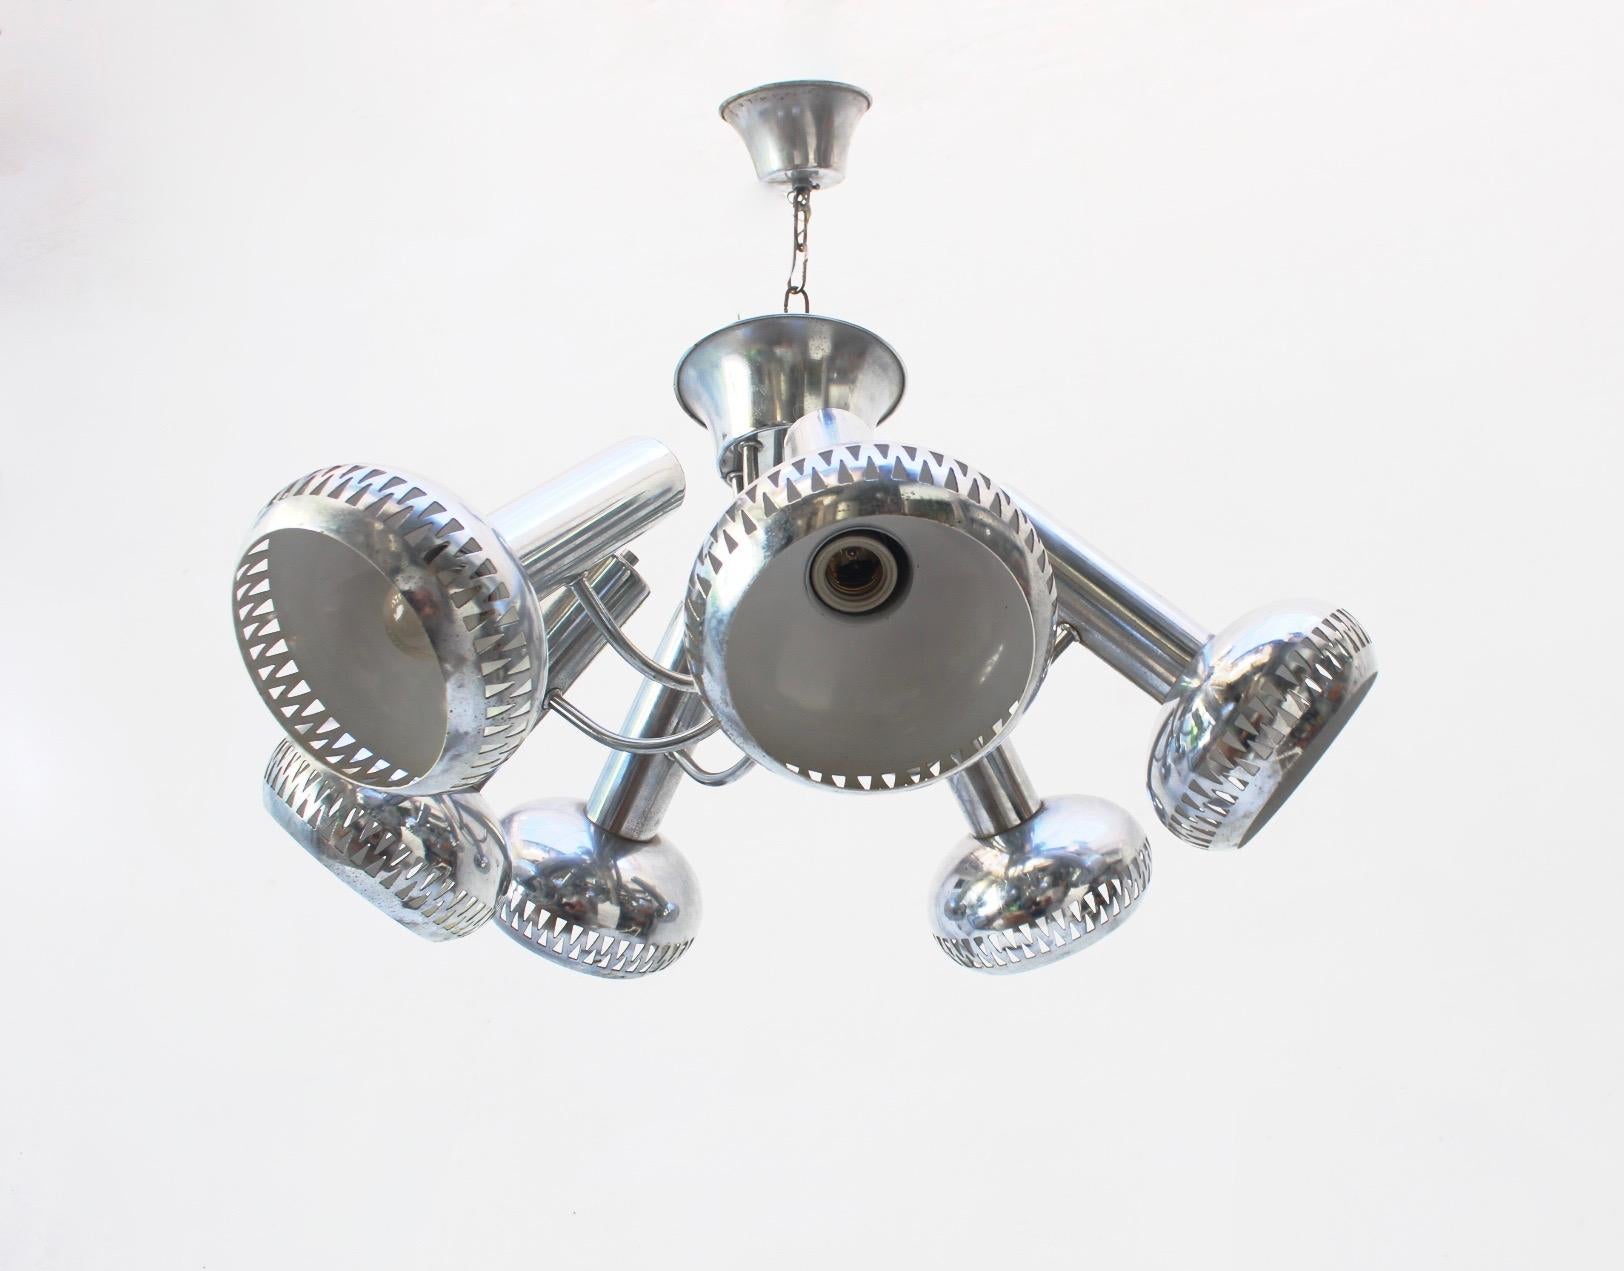 Midcentury Articulated Multi Focus Spider Chromed Pendant Lamp, Spain, 1970s.
Metal Body heigh without chain: 33 cm